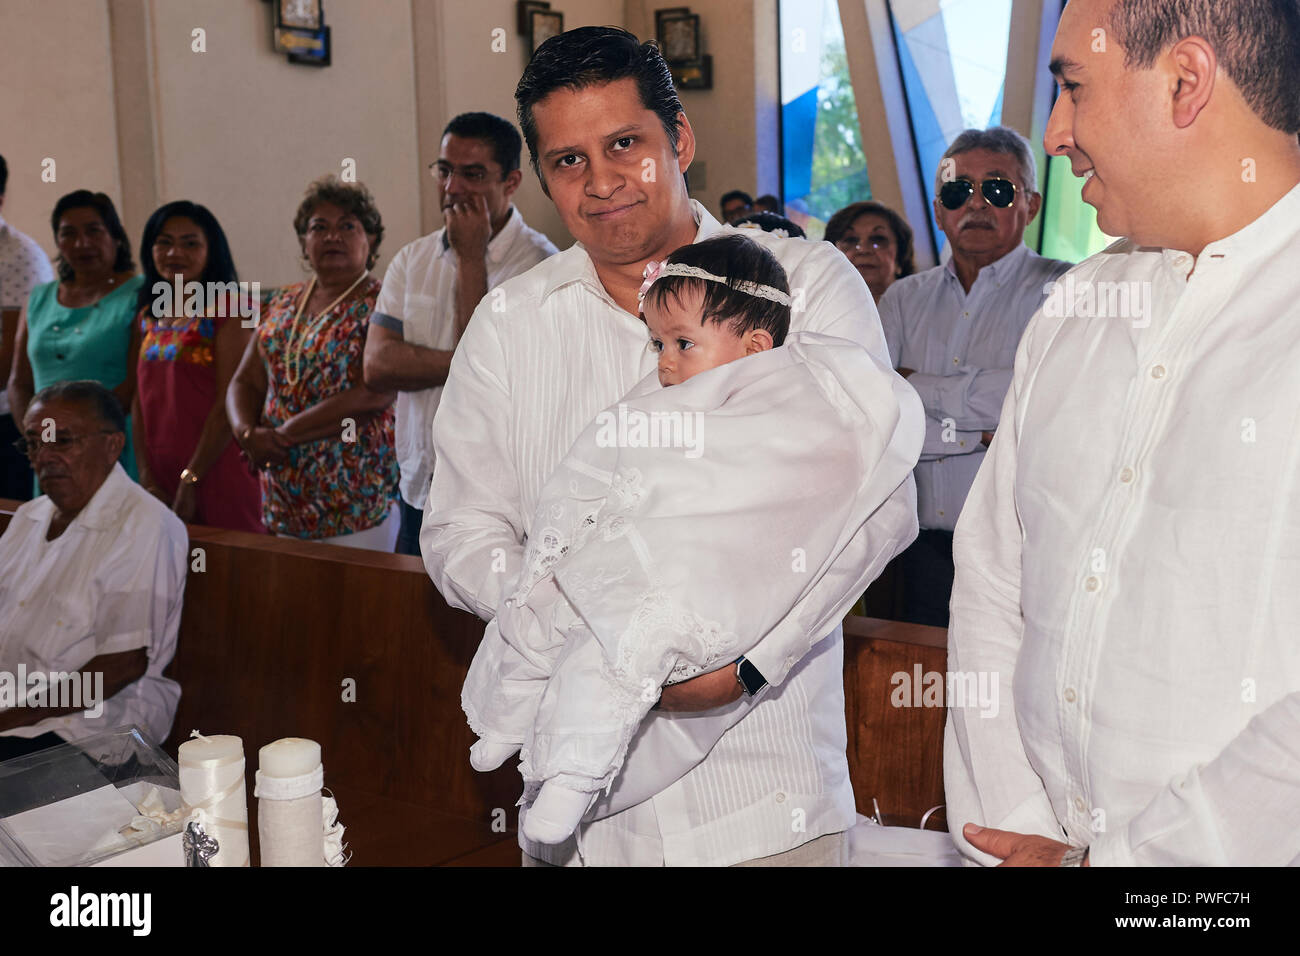 MERIDA, YUC/MEXICO - NOV 18, 2017: Godfather carries goddaughter for baptism at the catholic church Stock Photo